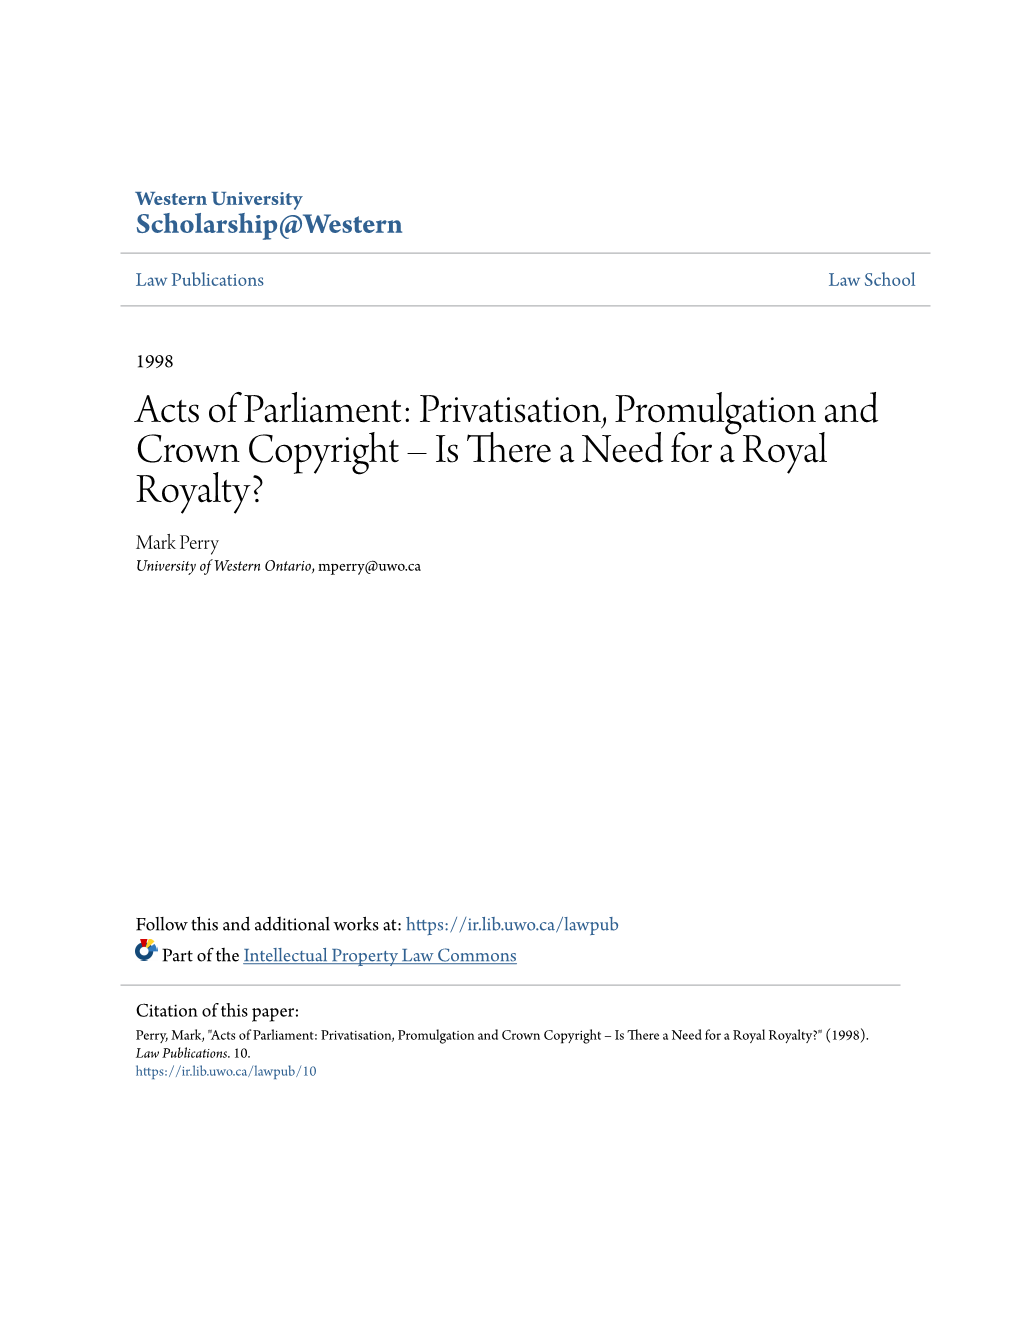 Acts of Parliament: Privatisation, Promulgation and Crown Copyright – Is There a Need for a Royal Royalty? Mark Perry University of Western Ontario, Mperry@Uwo.Ca